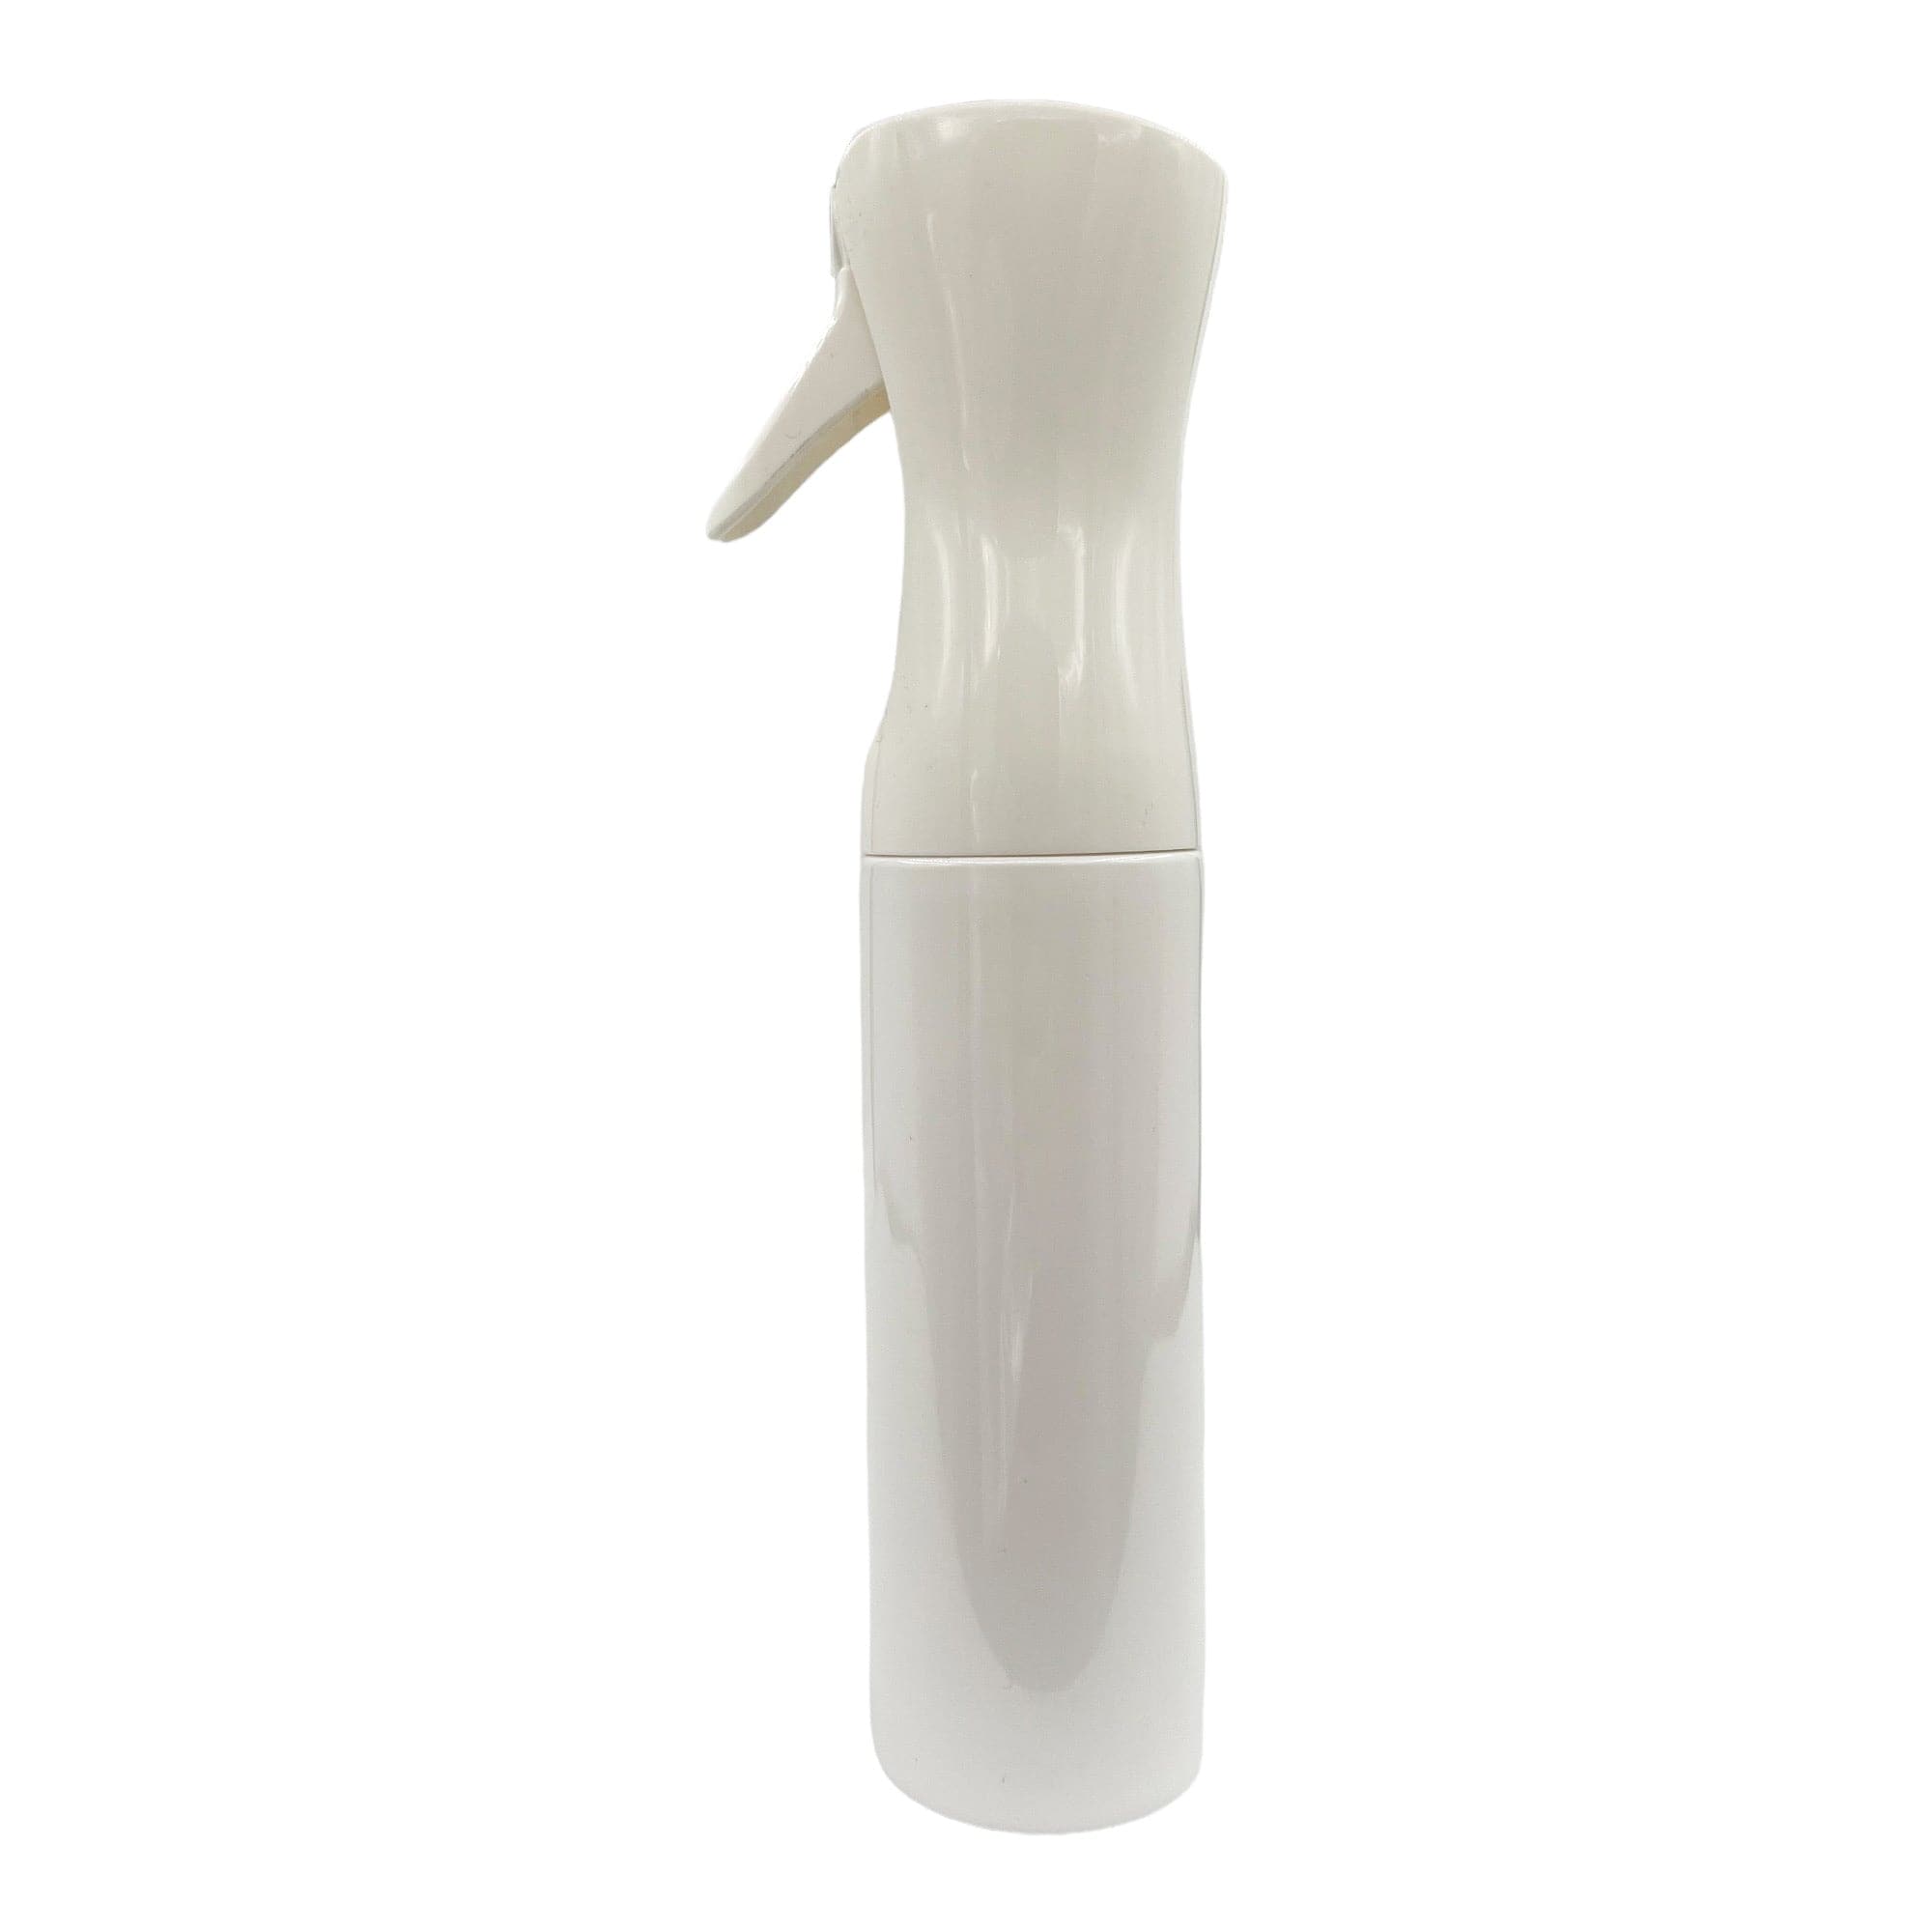 Eson - Water Spray Bottle 300ml Empty Refillable Continuous Water (White)